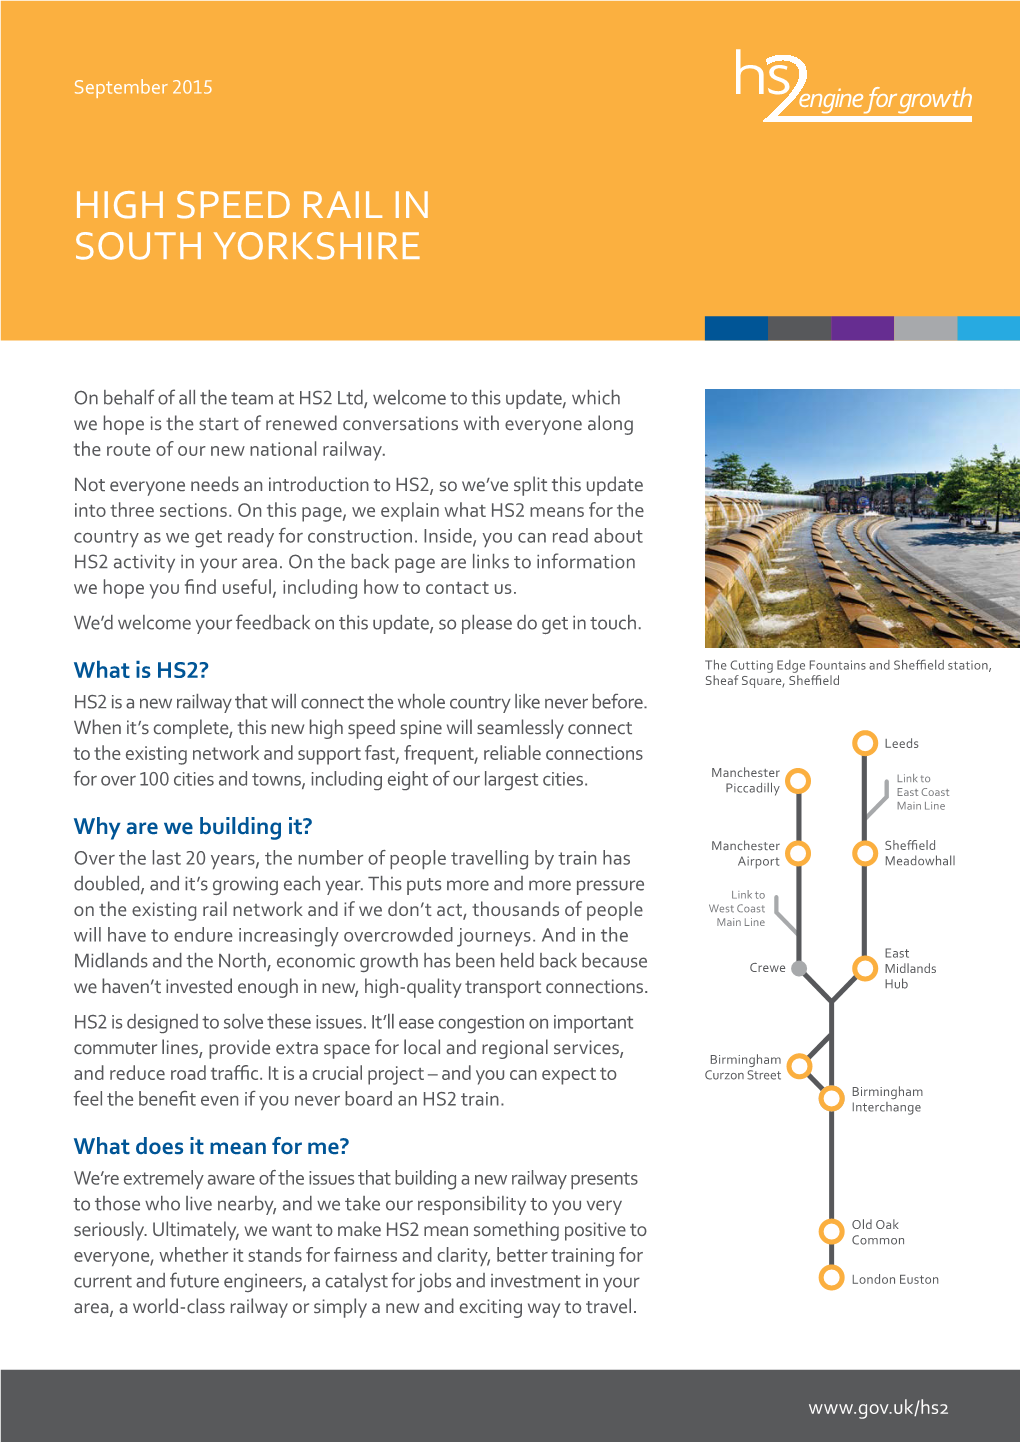 High Speed Rail in South Yorkshire